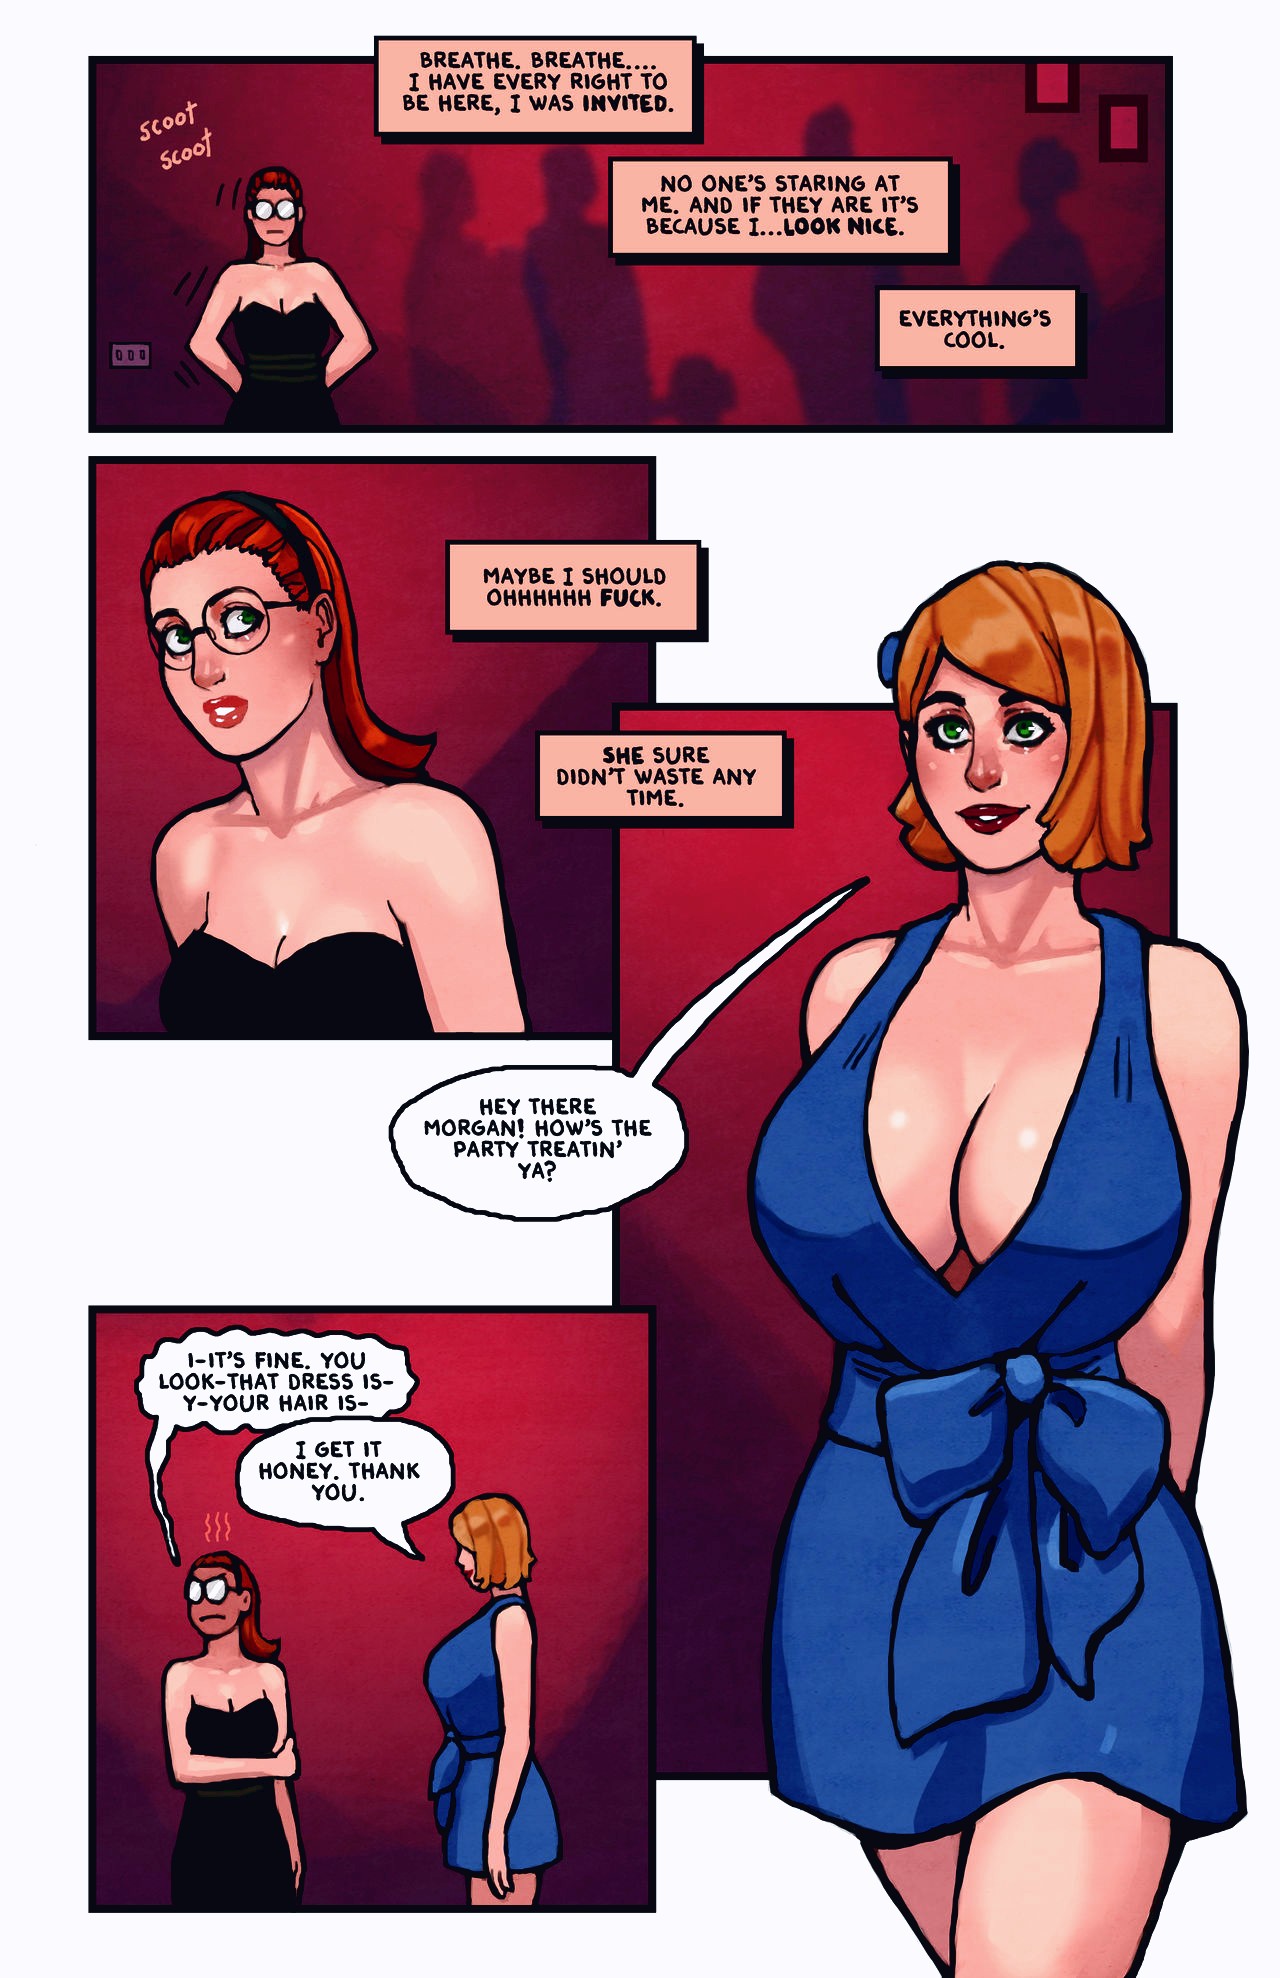 This Romantic World page 071